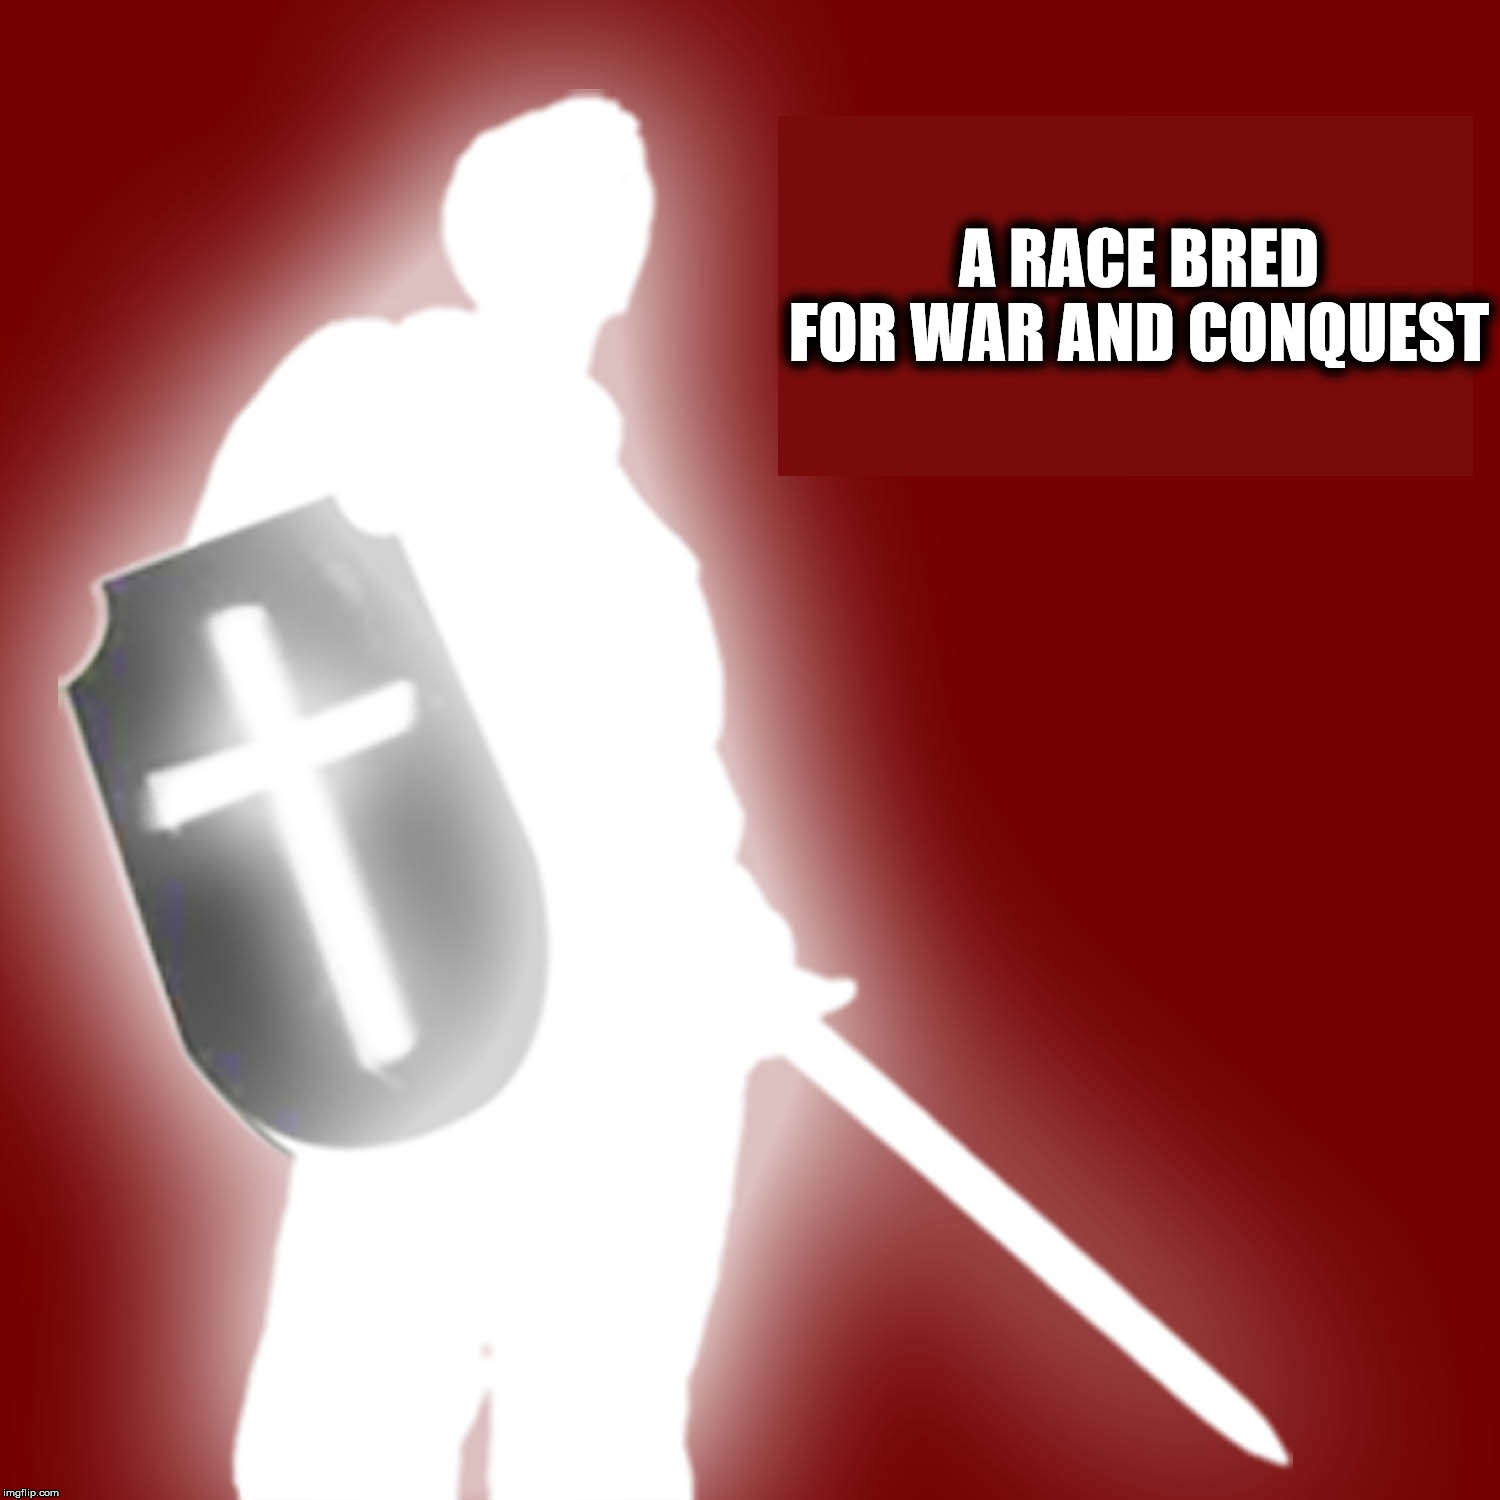  A RACE BRED FOR WAR AND CONQUEST | image tagged in christian soldier,christianity,war,conquest,spirituality,the master race | made w/ Imgflip meme maker